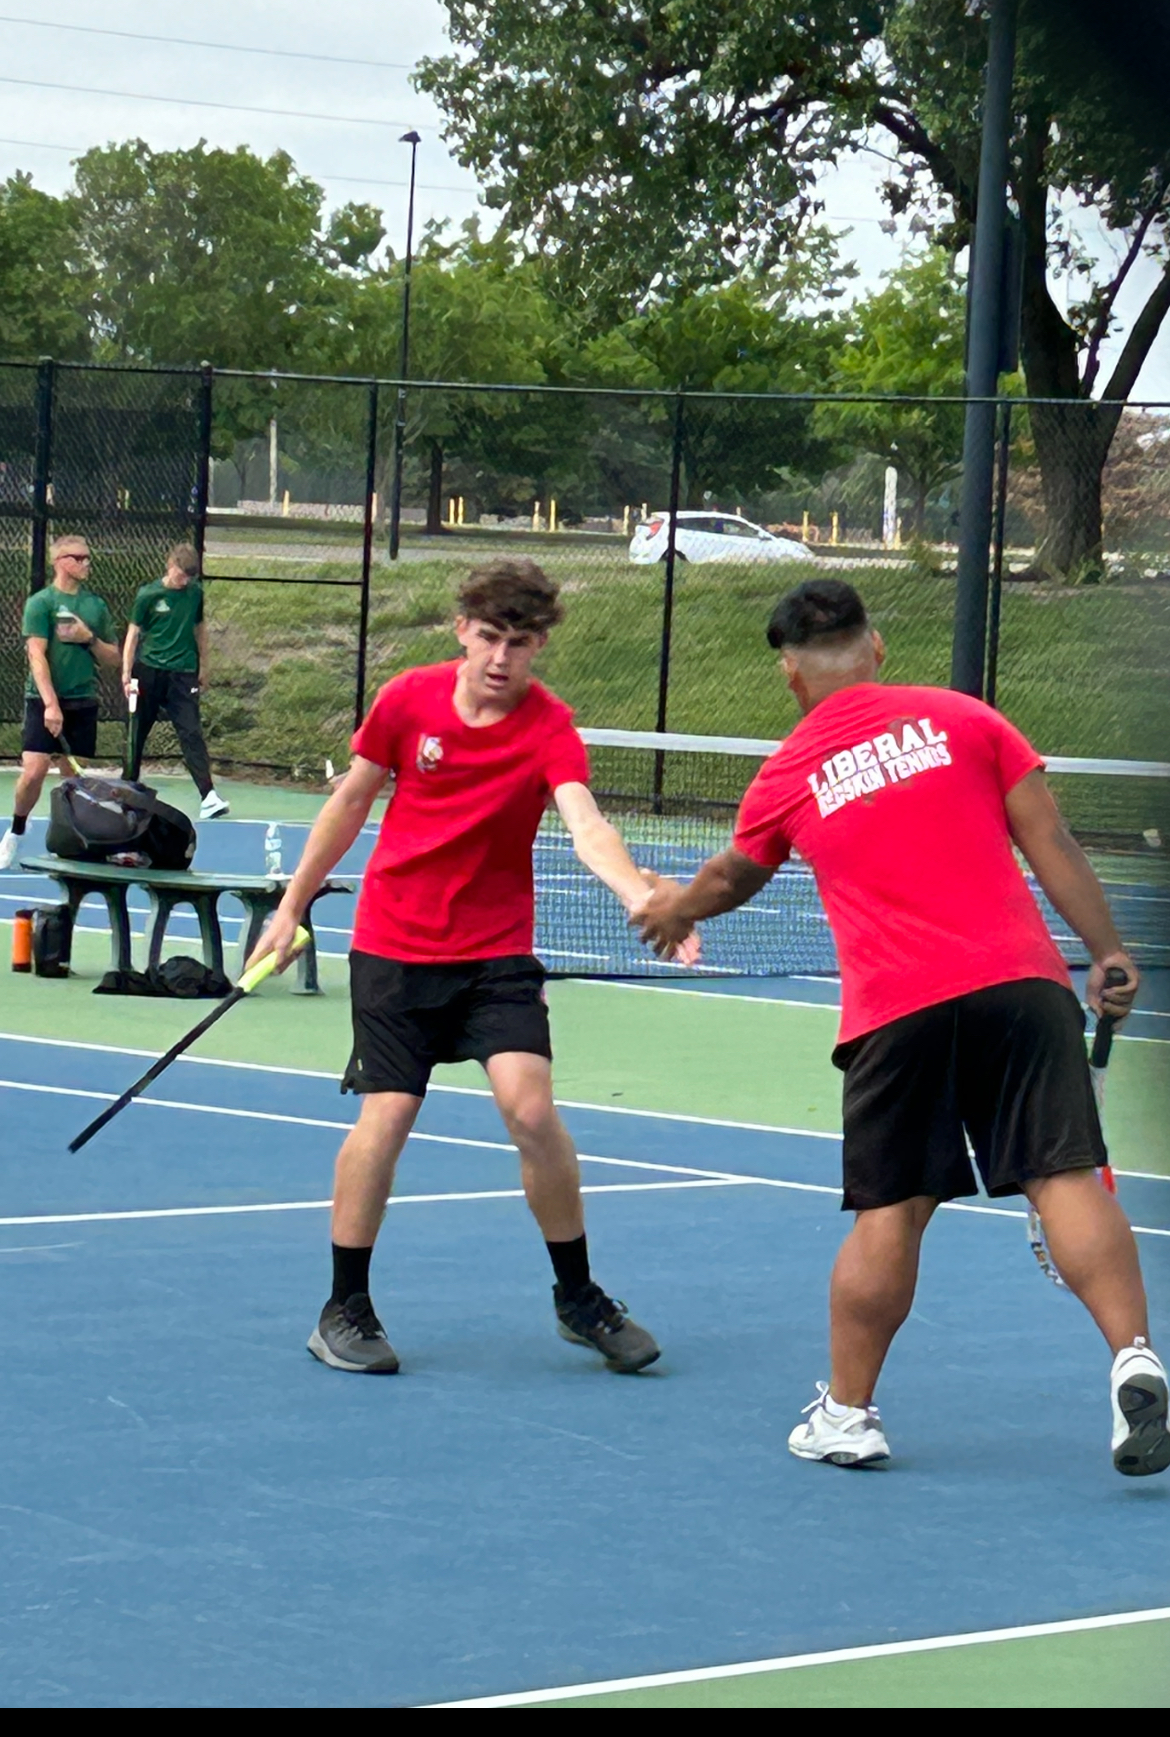 Liberal Sends Both Doubles Teams to State